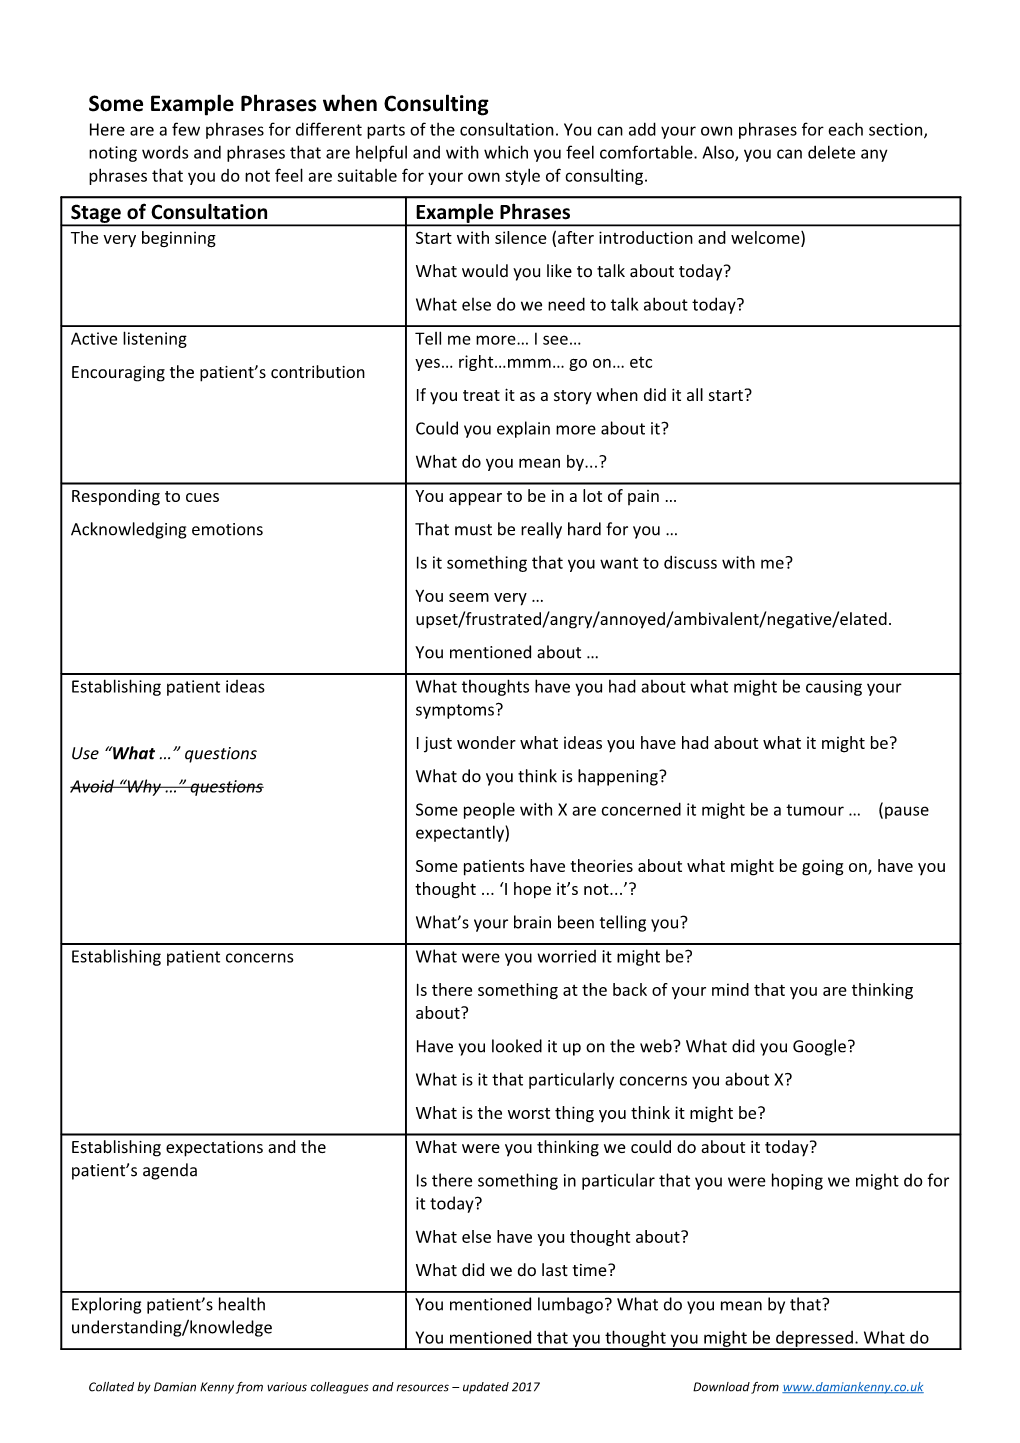 Some Key Suggested Phrases for Consultations